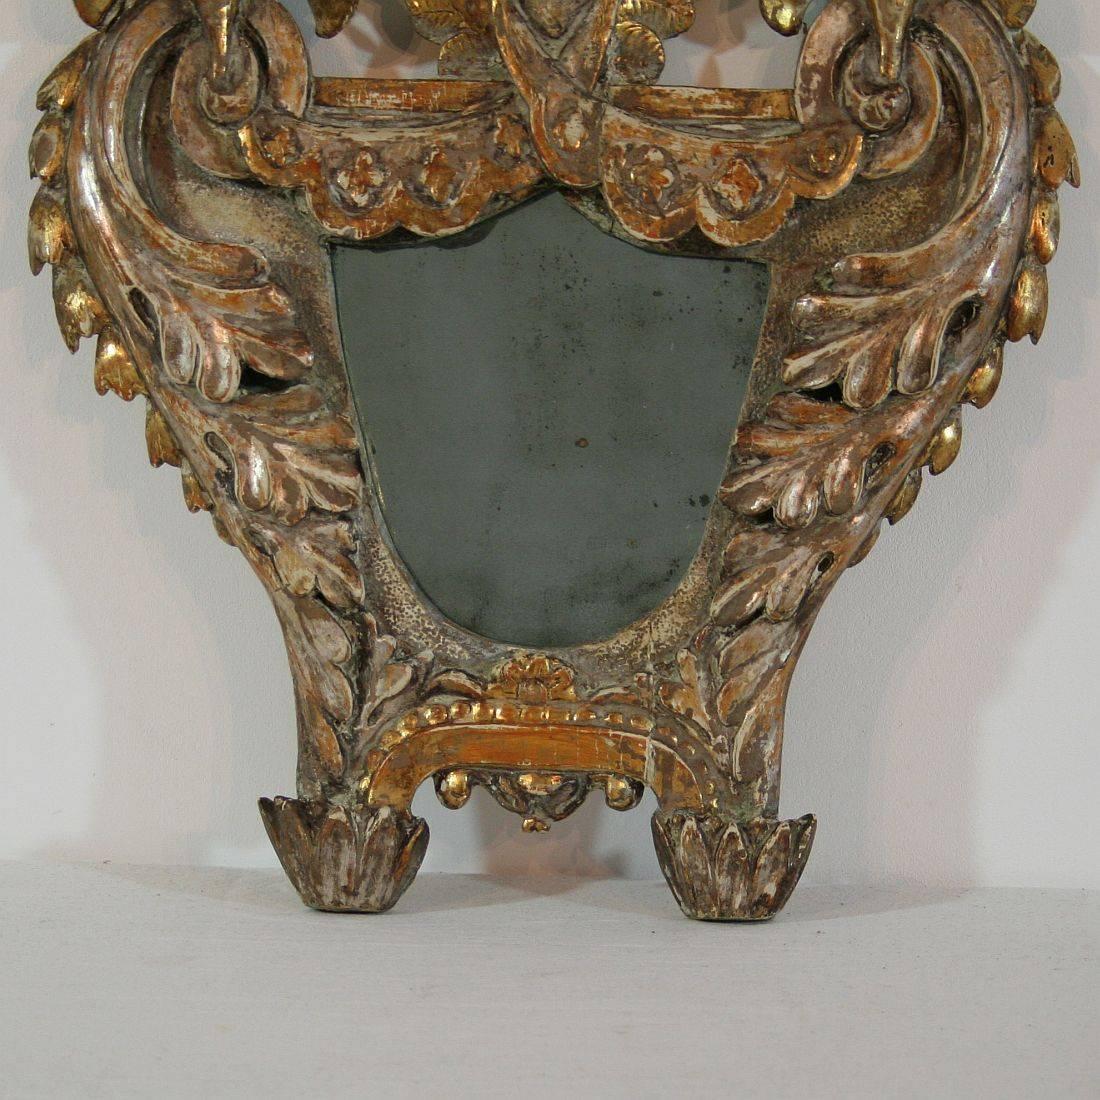 Carved 18th Century Italian Baroque Mirror with an Angel